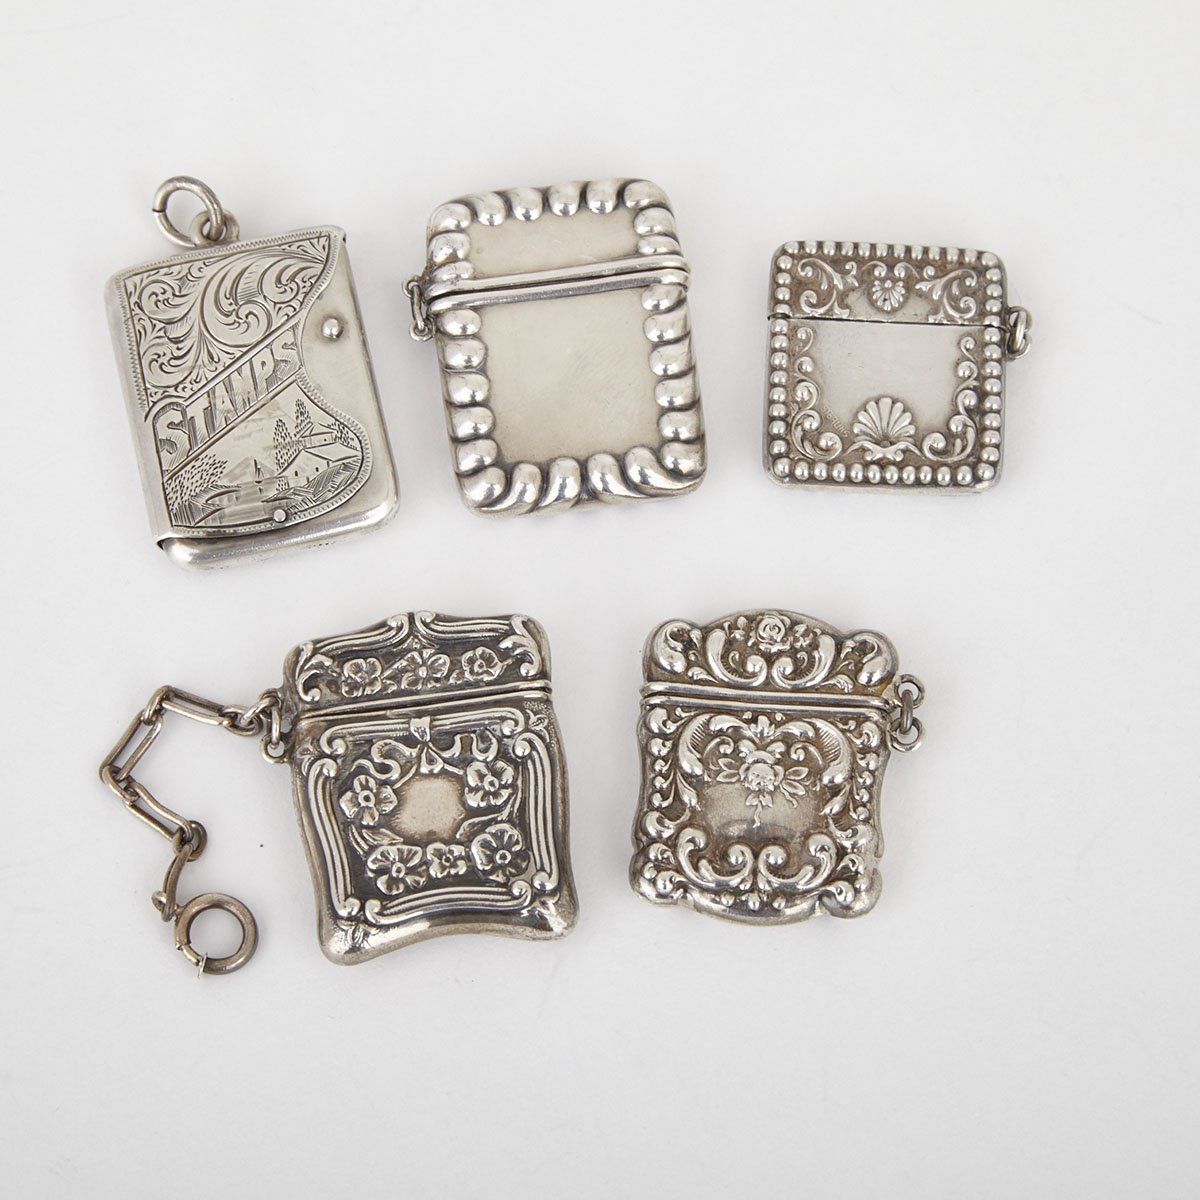 Five American Silver Stamp Cases, c.1900